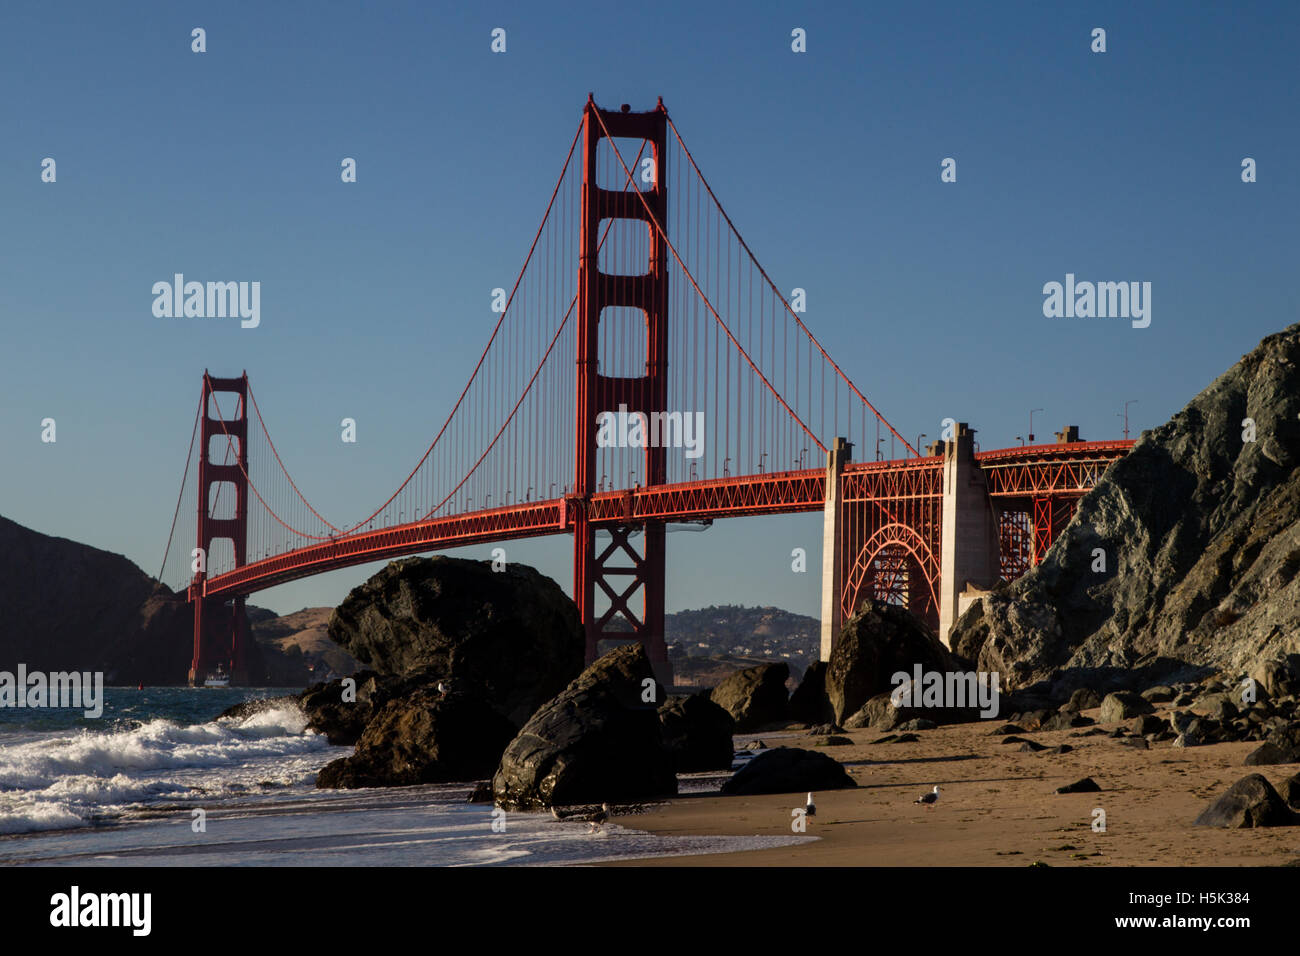 View from Marshalls Beach on the Golden Gate Bridge in San Francisco, California, USA on a cloudless evening. Stock Photo